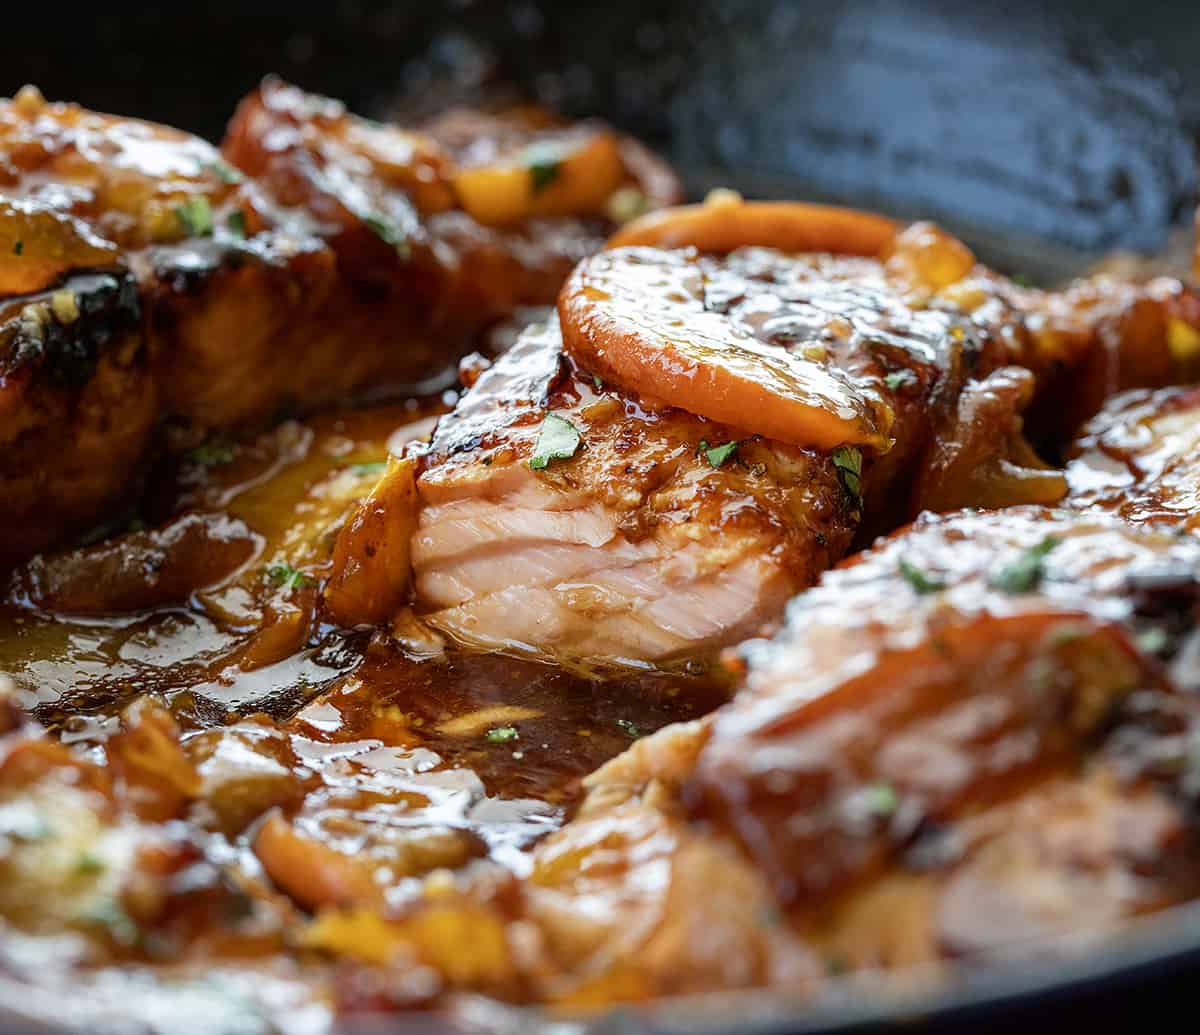 Piece of Bourbon Peach Roasted Salmon in a Pan with Some Removed so Inside is Seen.